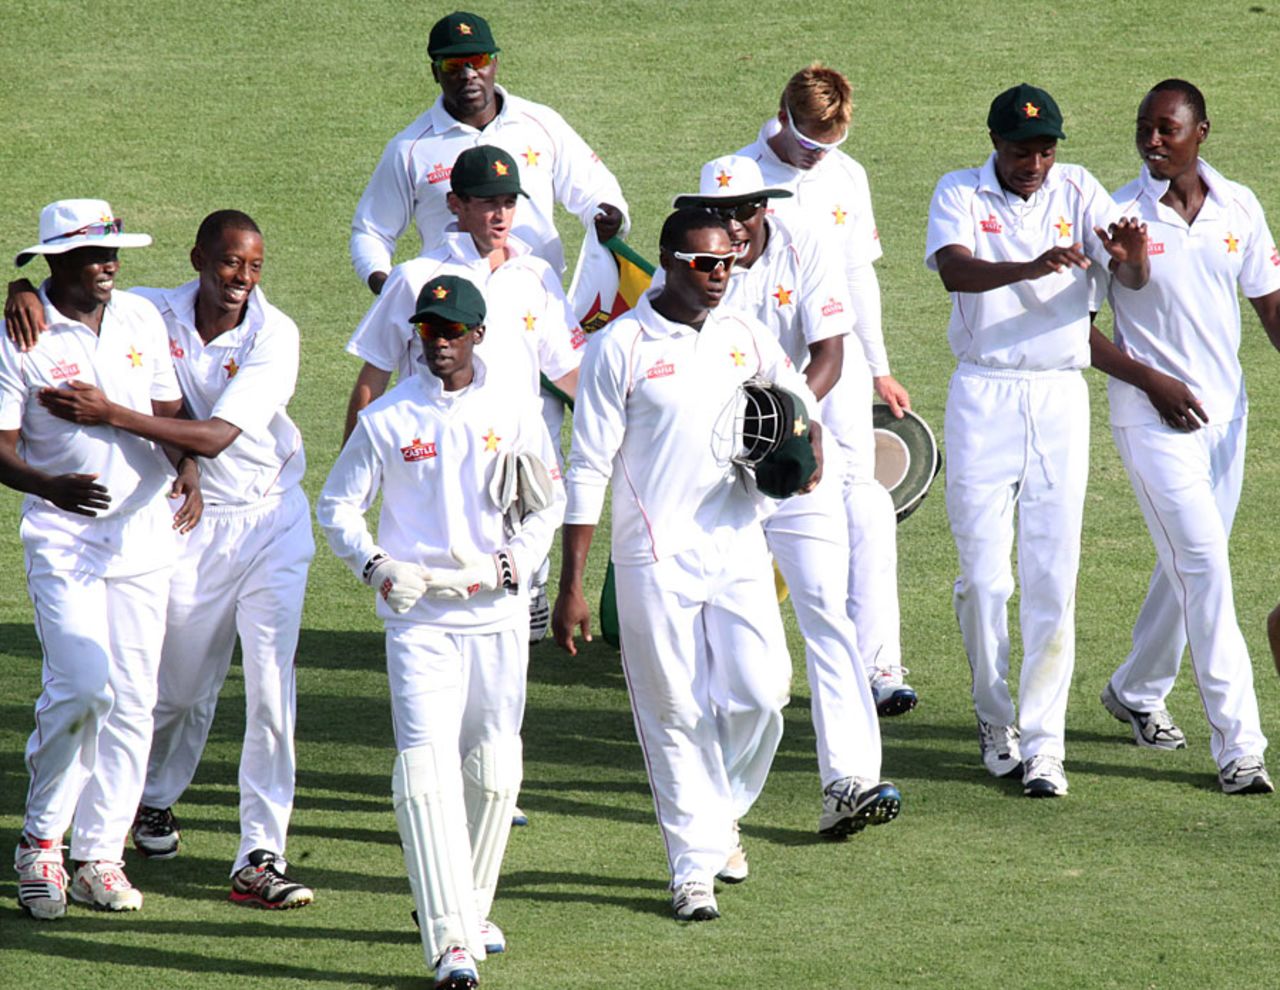 Zimbabwe walk off the pitch after their crushing victory, Zimbabwe v Bangladesh, 1st Test, 4th day, Harare, April 20, 2013